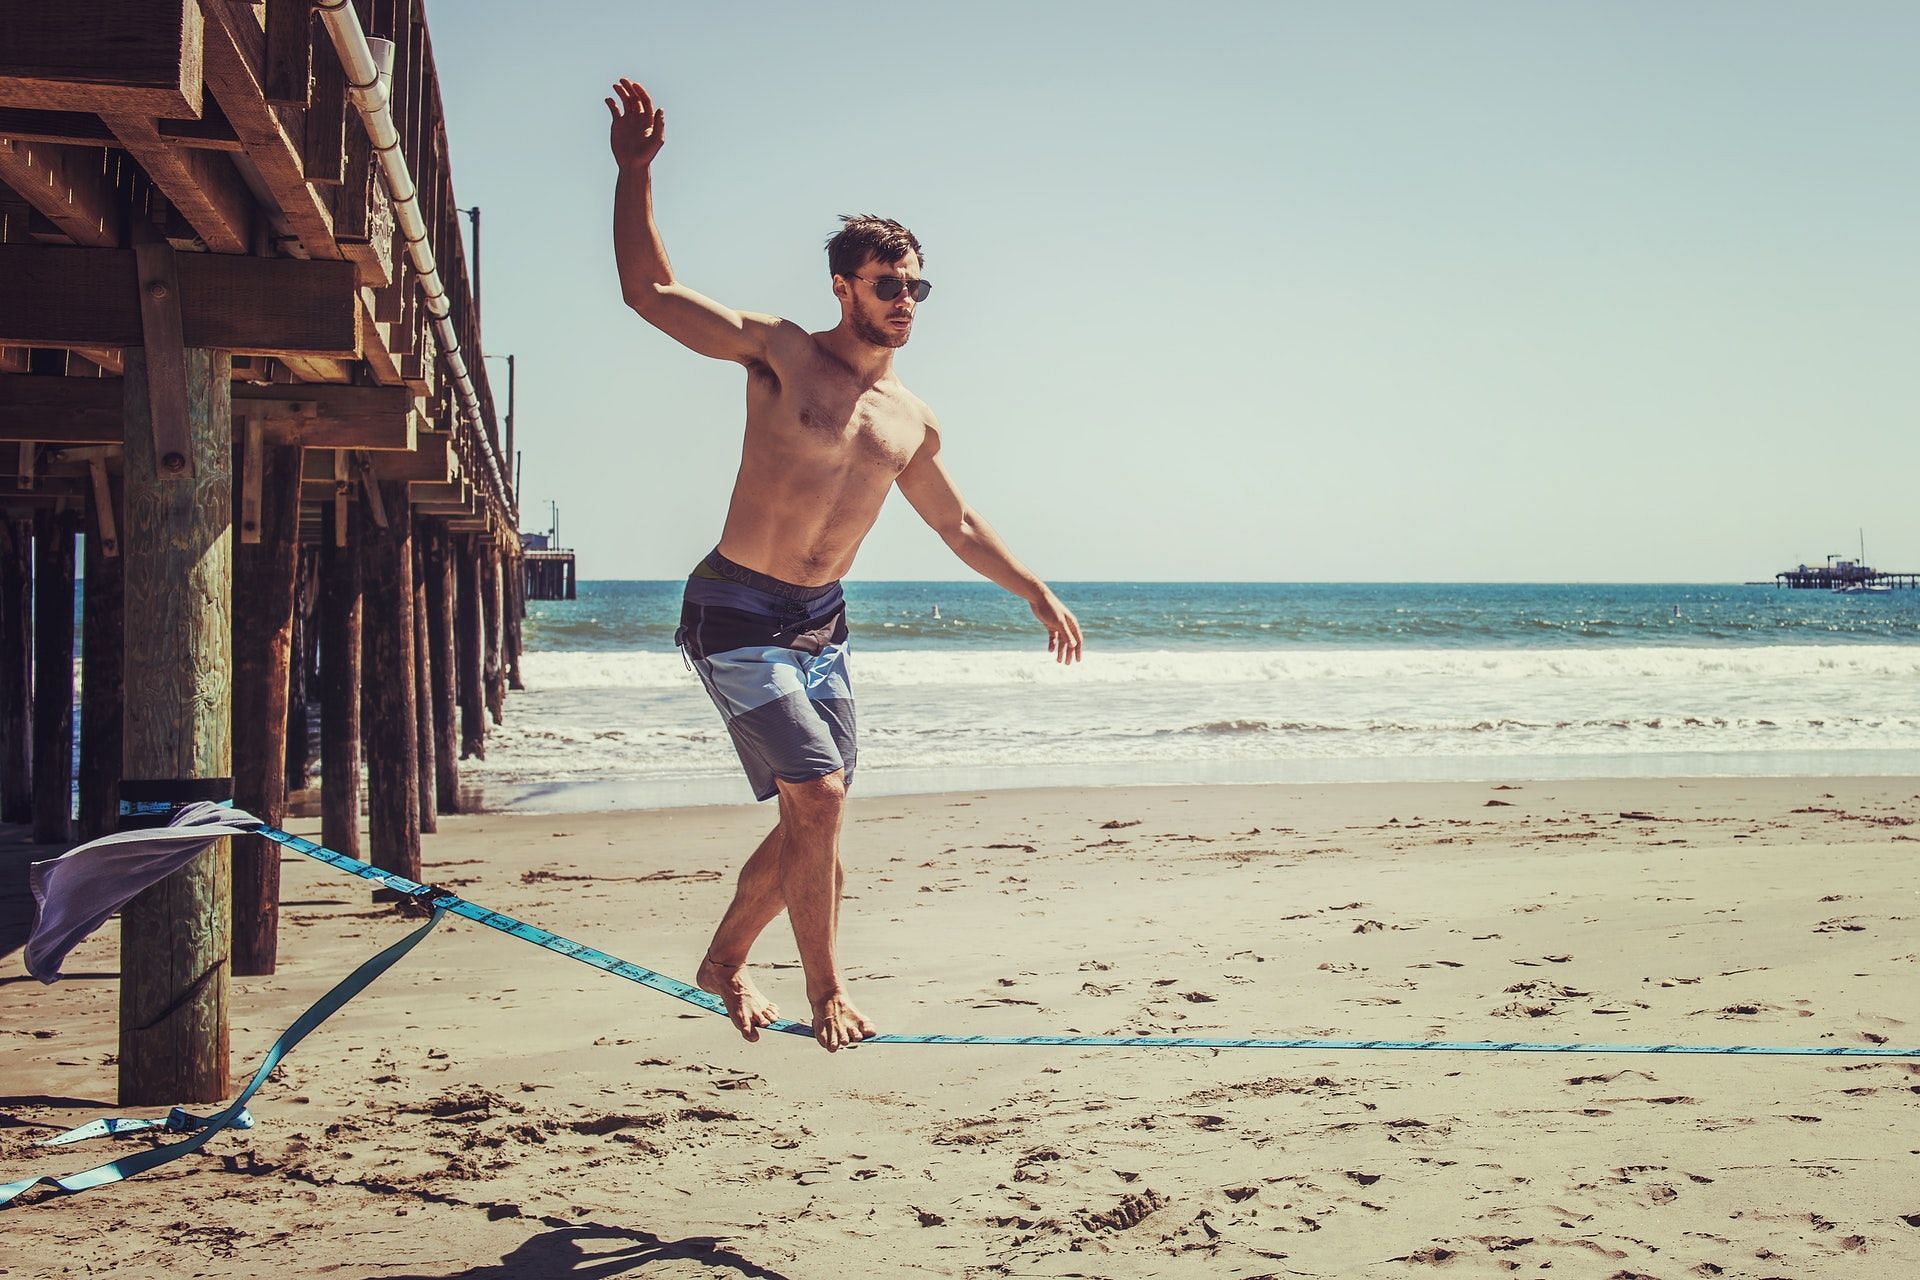 There are many balance exercises you can do using a slackline. (Photo by Tim Mossholder via pexels)